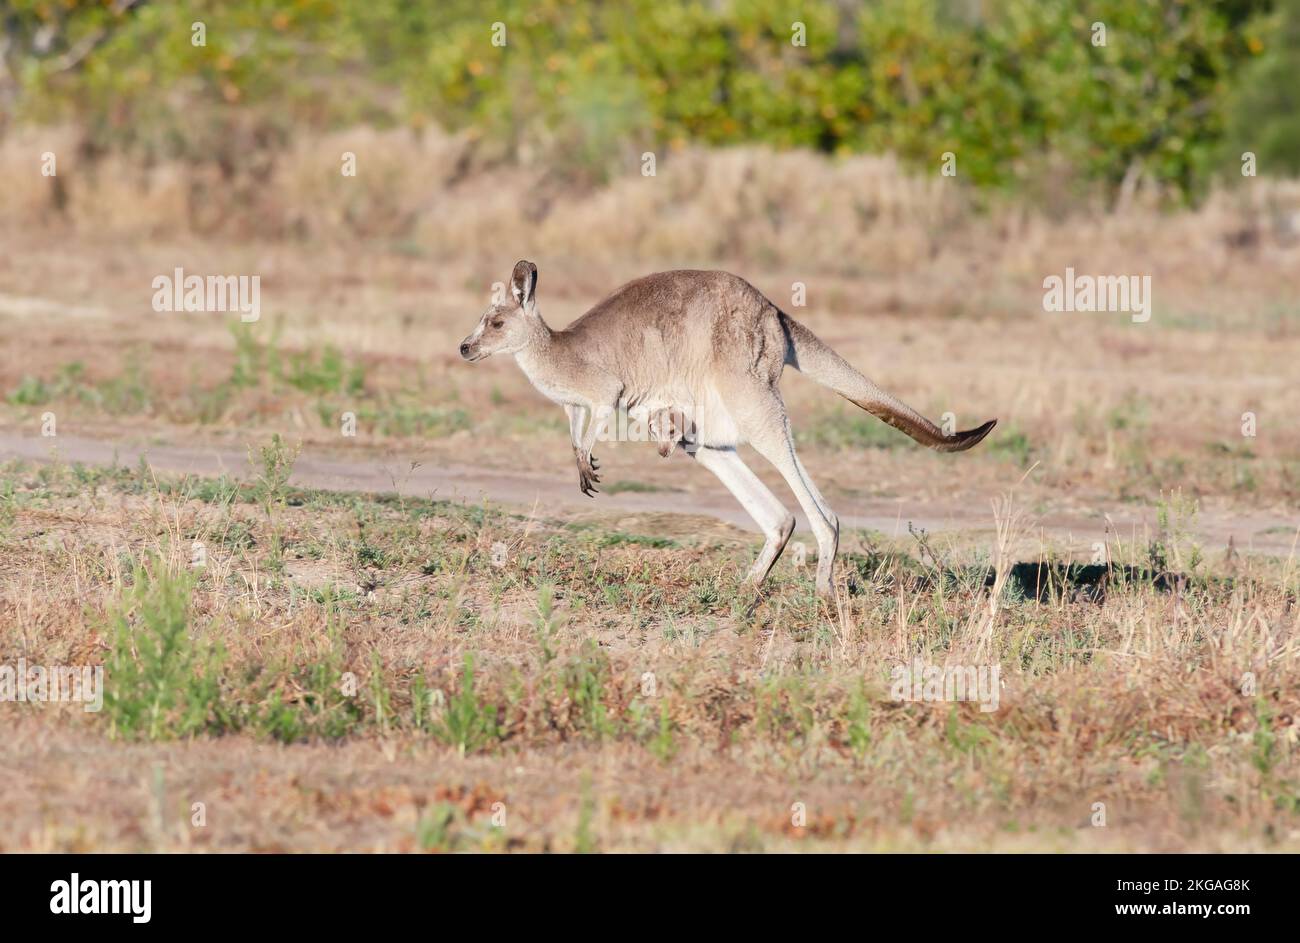 The eastern grey kangaroo (Macropus giganteus) is a marsupial found in eastern third of Australia, Hopping along with its joey in the pouch. Stock Photo